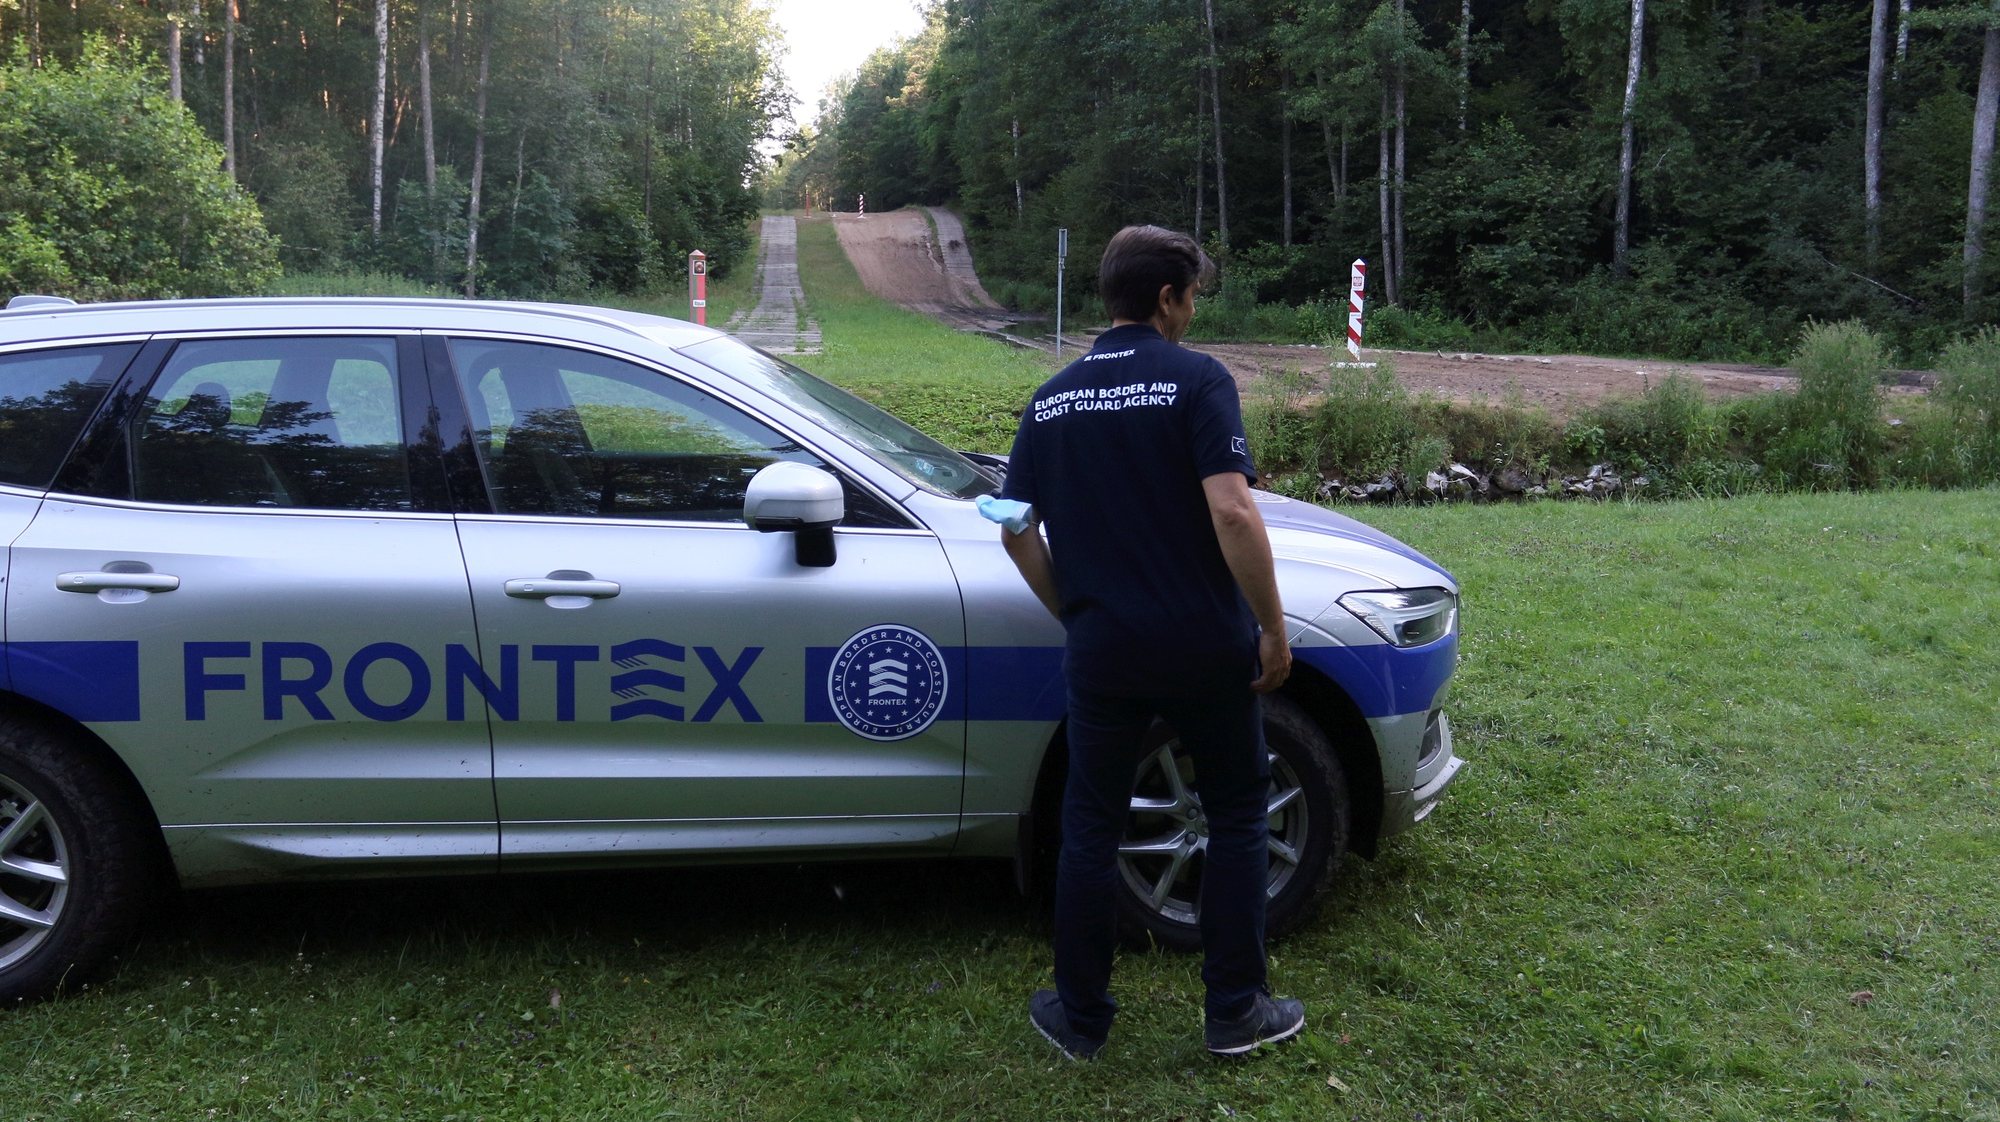 epa09353882 A member of the European Union border agency Frontex  in Kapciamiestis BCU, Lithuania, 19 July 2021. The European Union border agency Frontex is deploying 60 border guards to control the flows of illegal migrants from Belarus crossing the Lithuanian border. Over 1,900 migrants have been detained in Lithuania so far this year. Most of the migrants are from Iraq who have flown to Belarus on direct flights from Baghdad and Istanbul.  EPA/STR